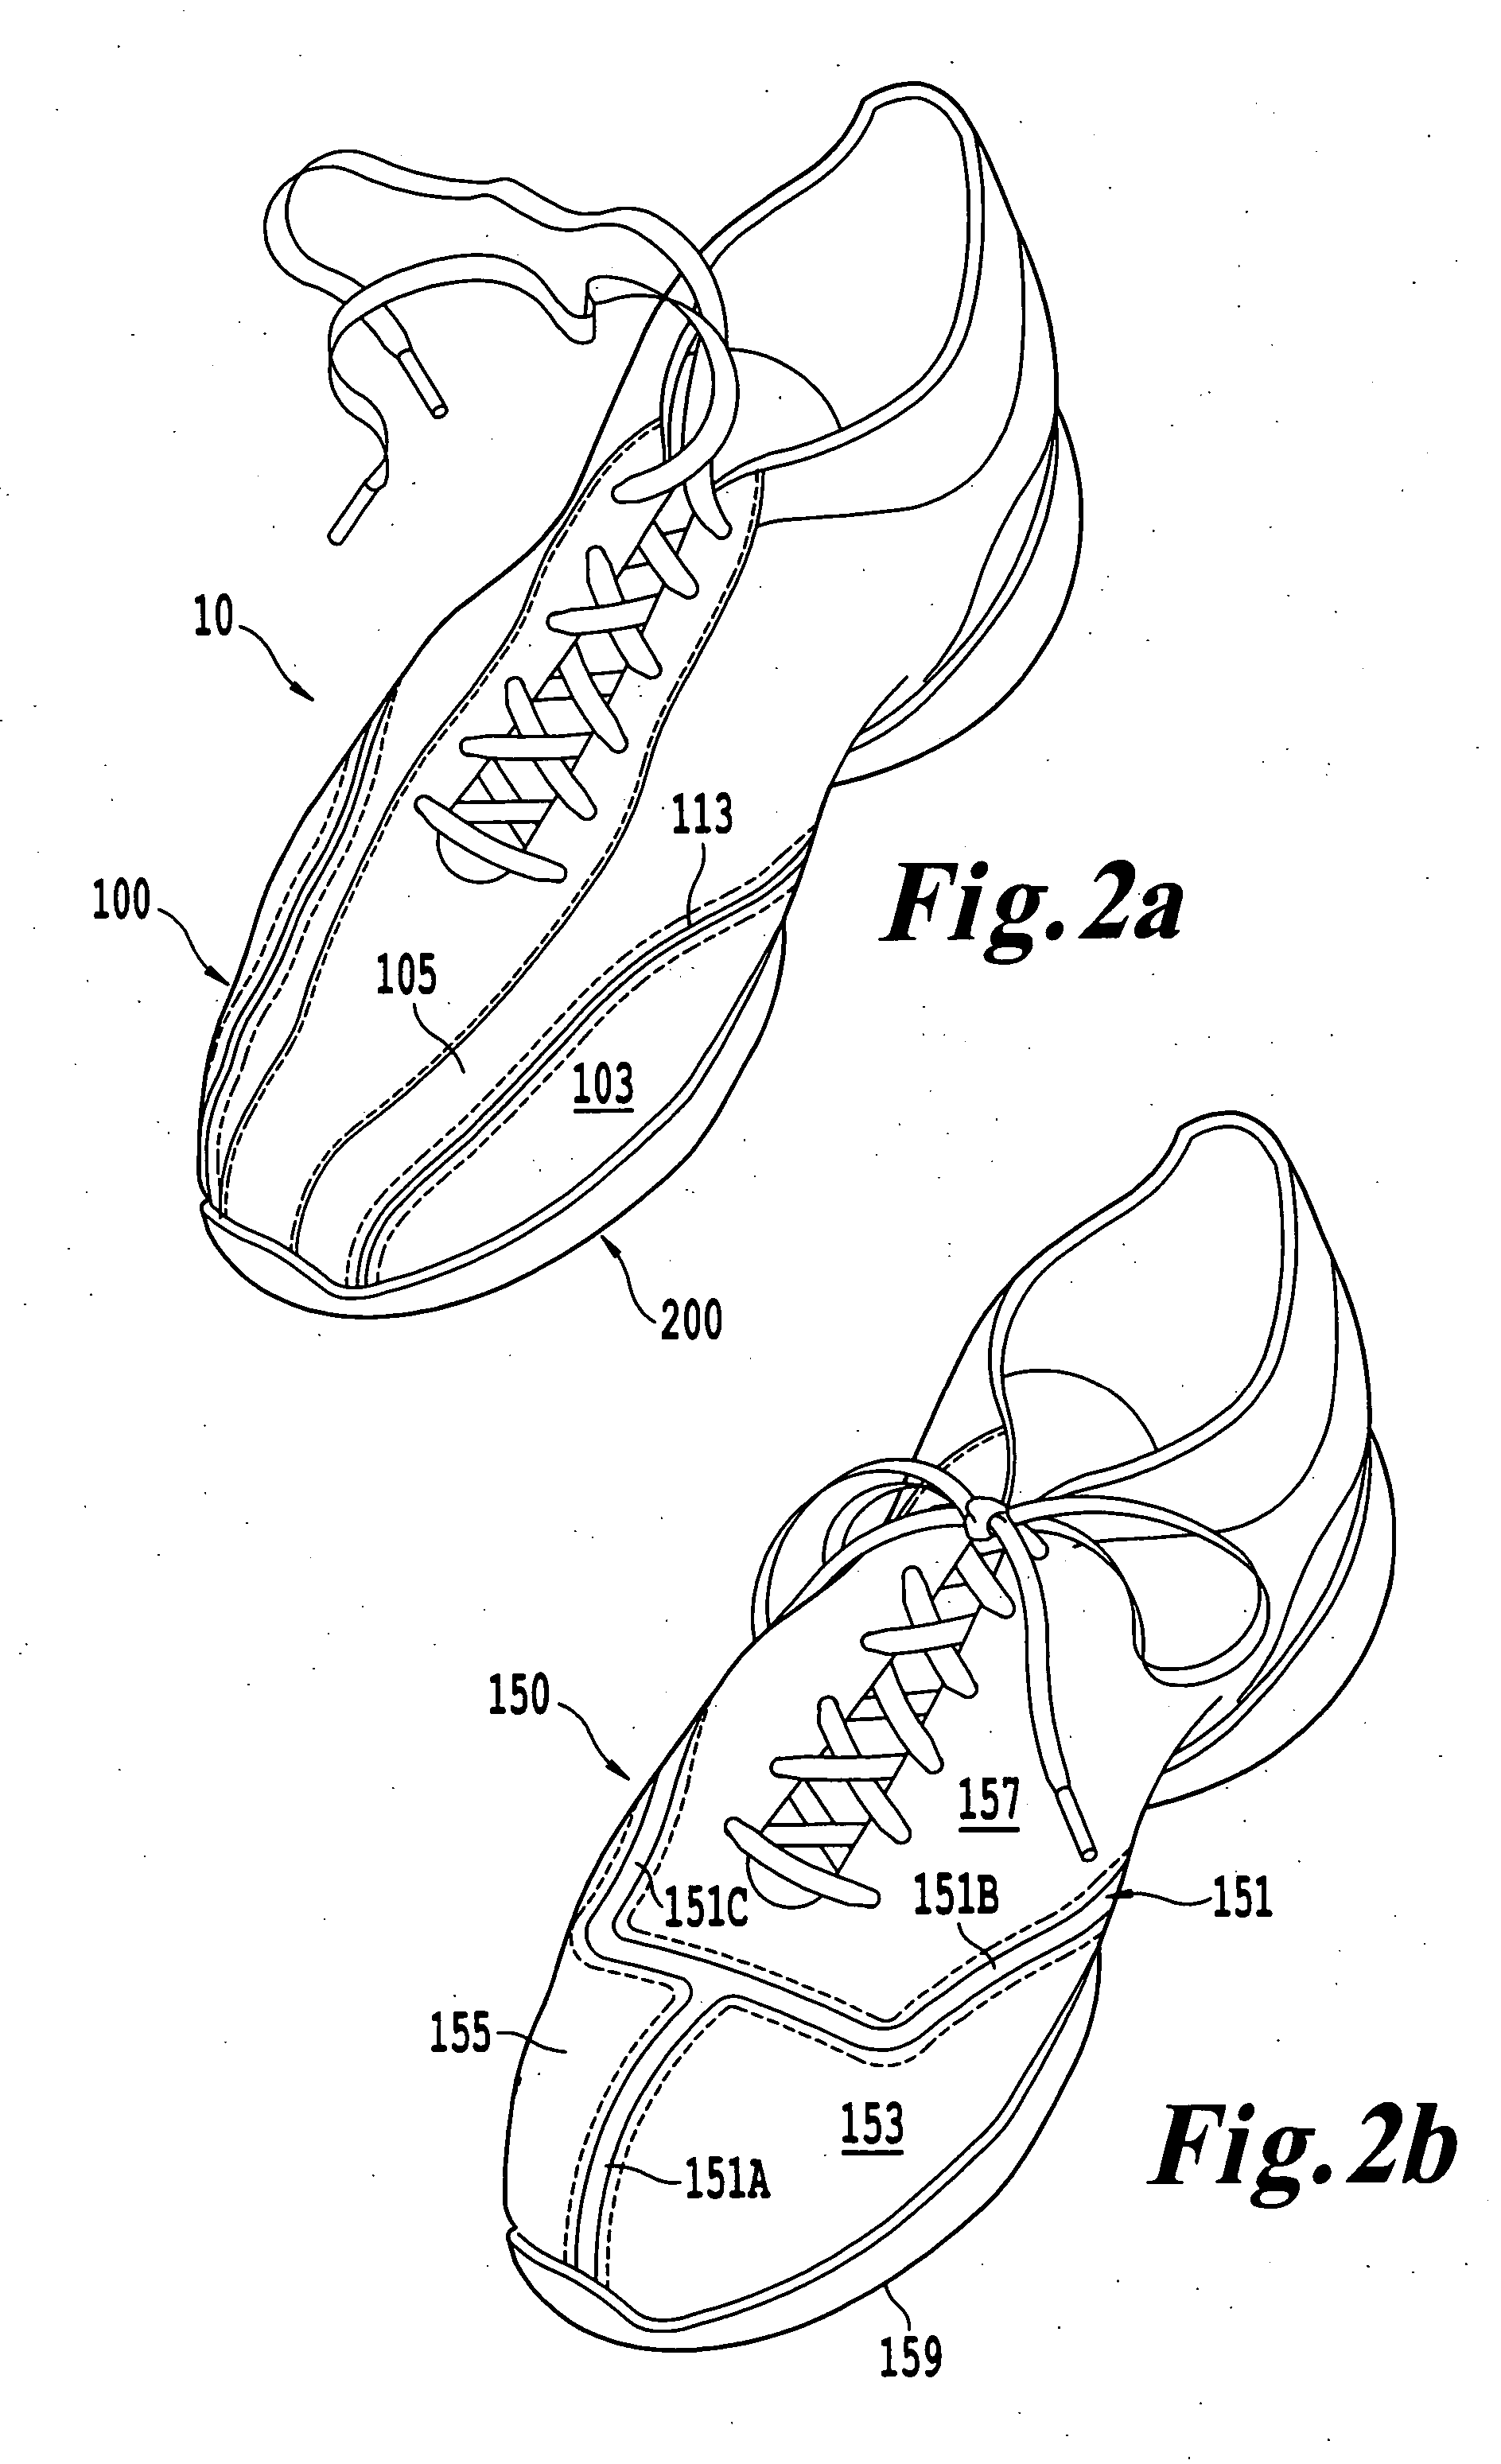 Method and system for identifying a kit of footwear components used to provide customized footwear to a consumer